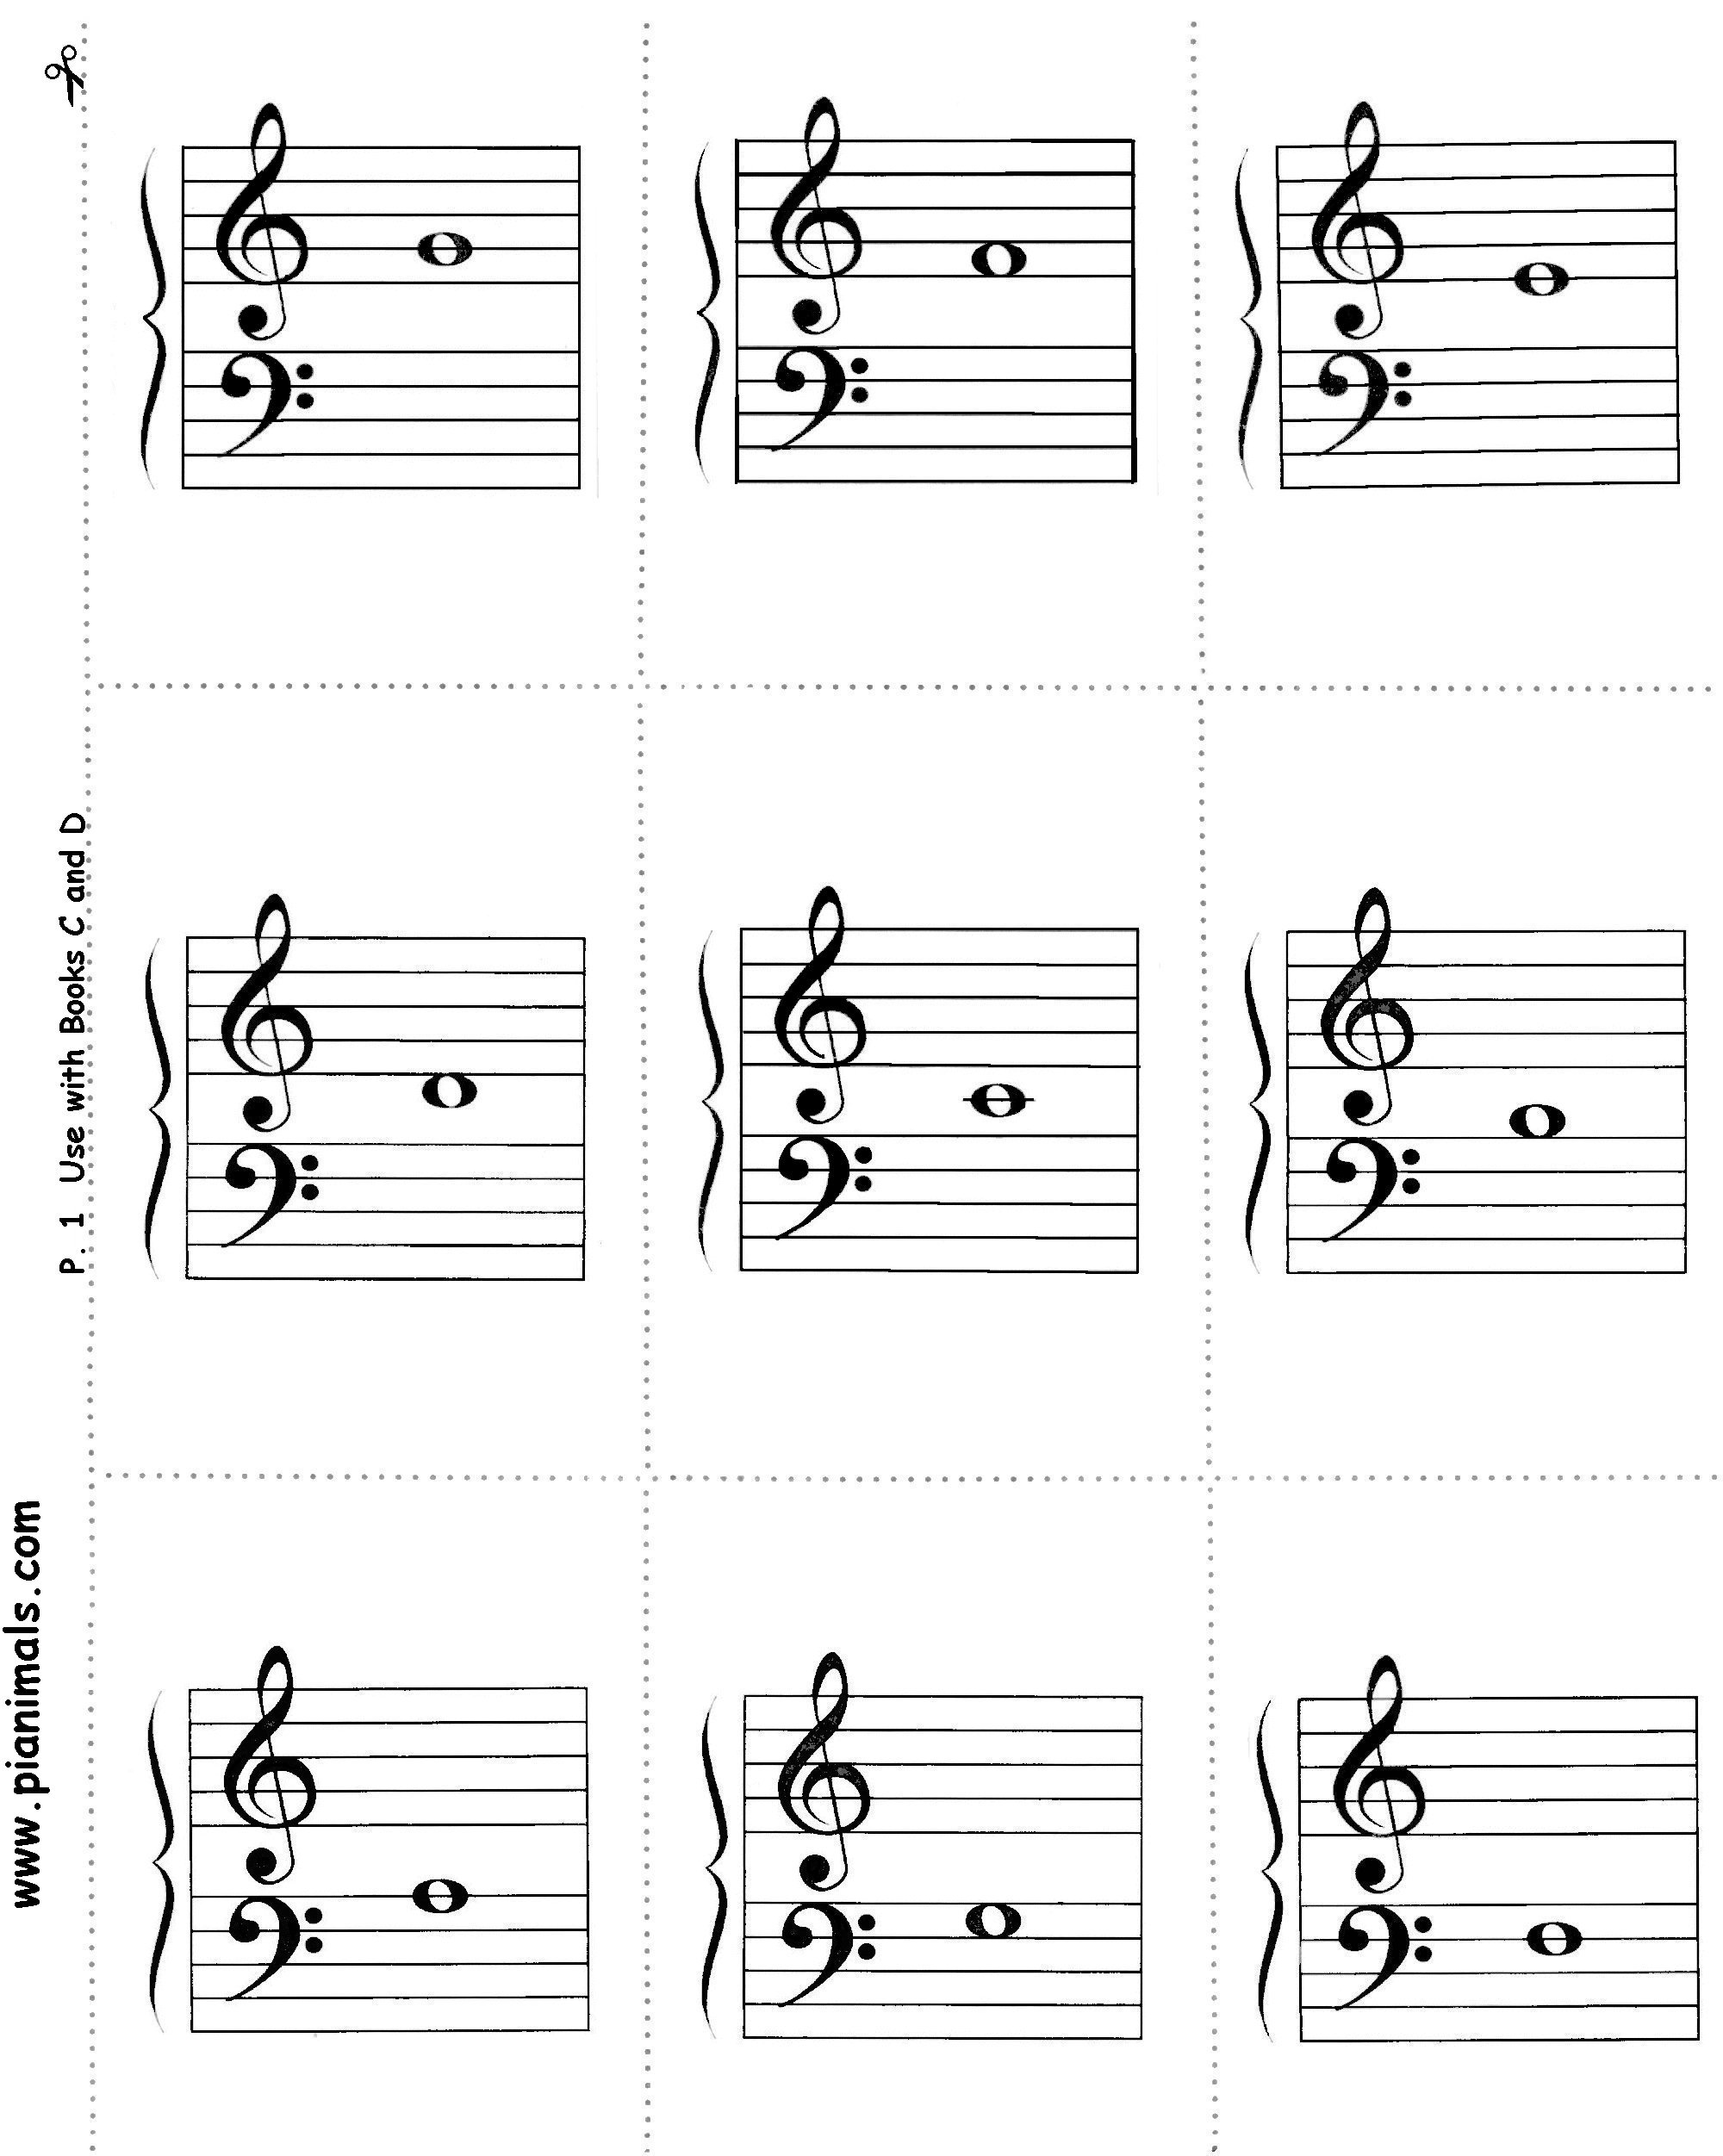 A Music Spelling Bee Music Matters Blog